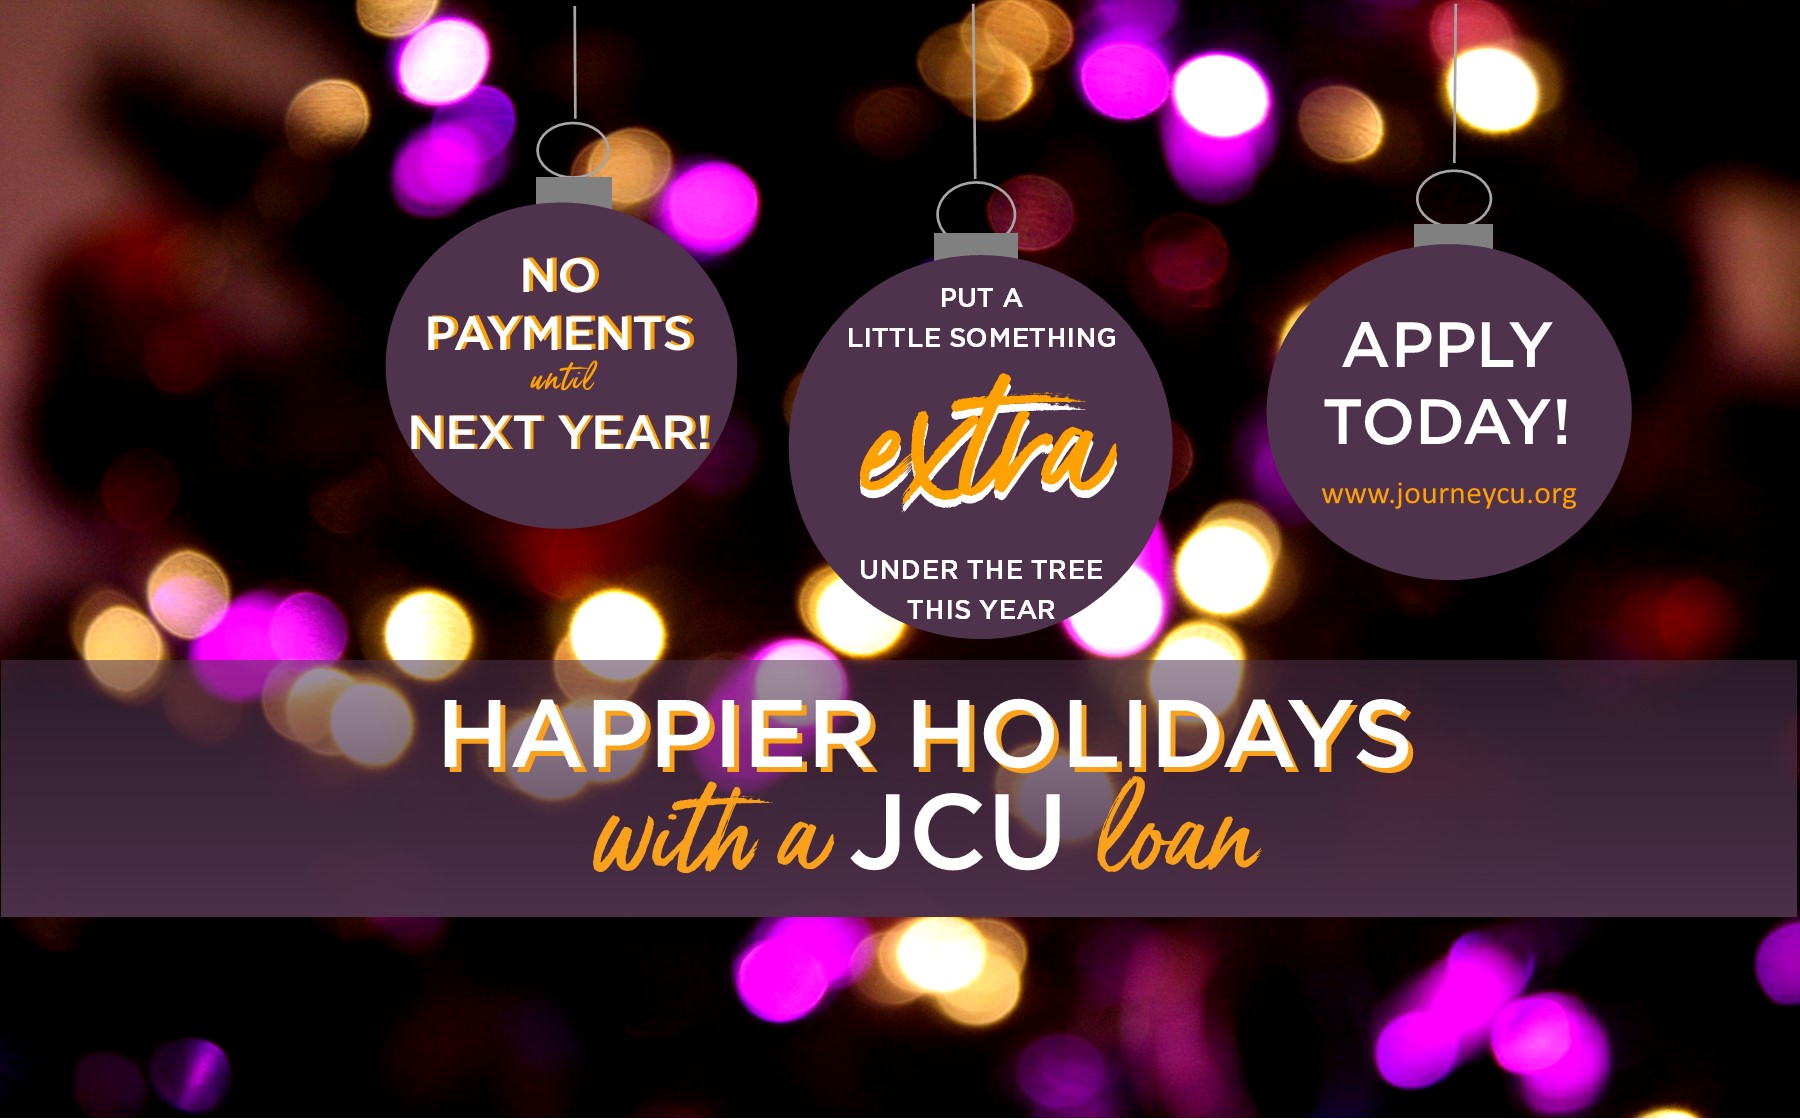 Happier Holidays with a JCU loan. Put a little something extra under the tree. No payments until next year